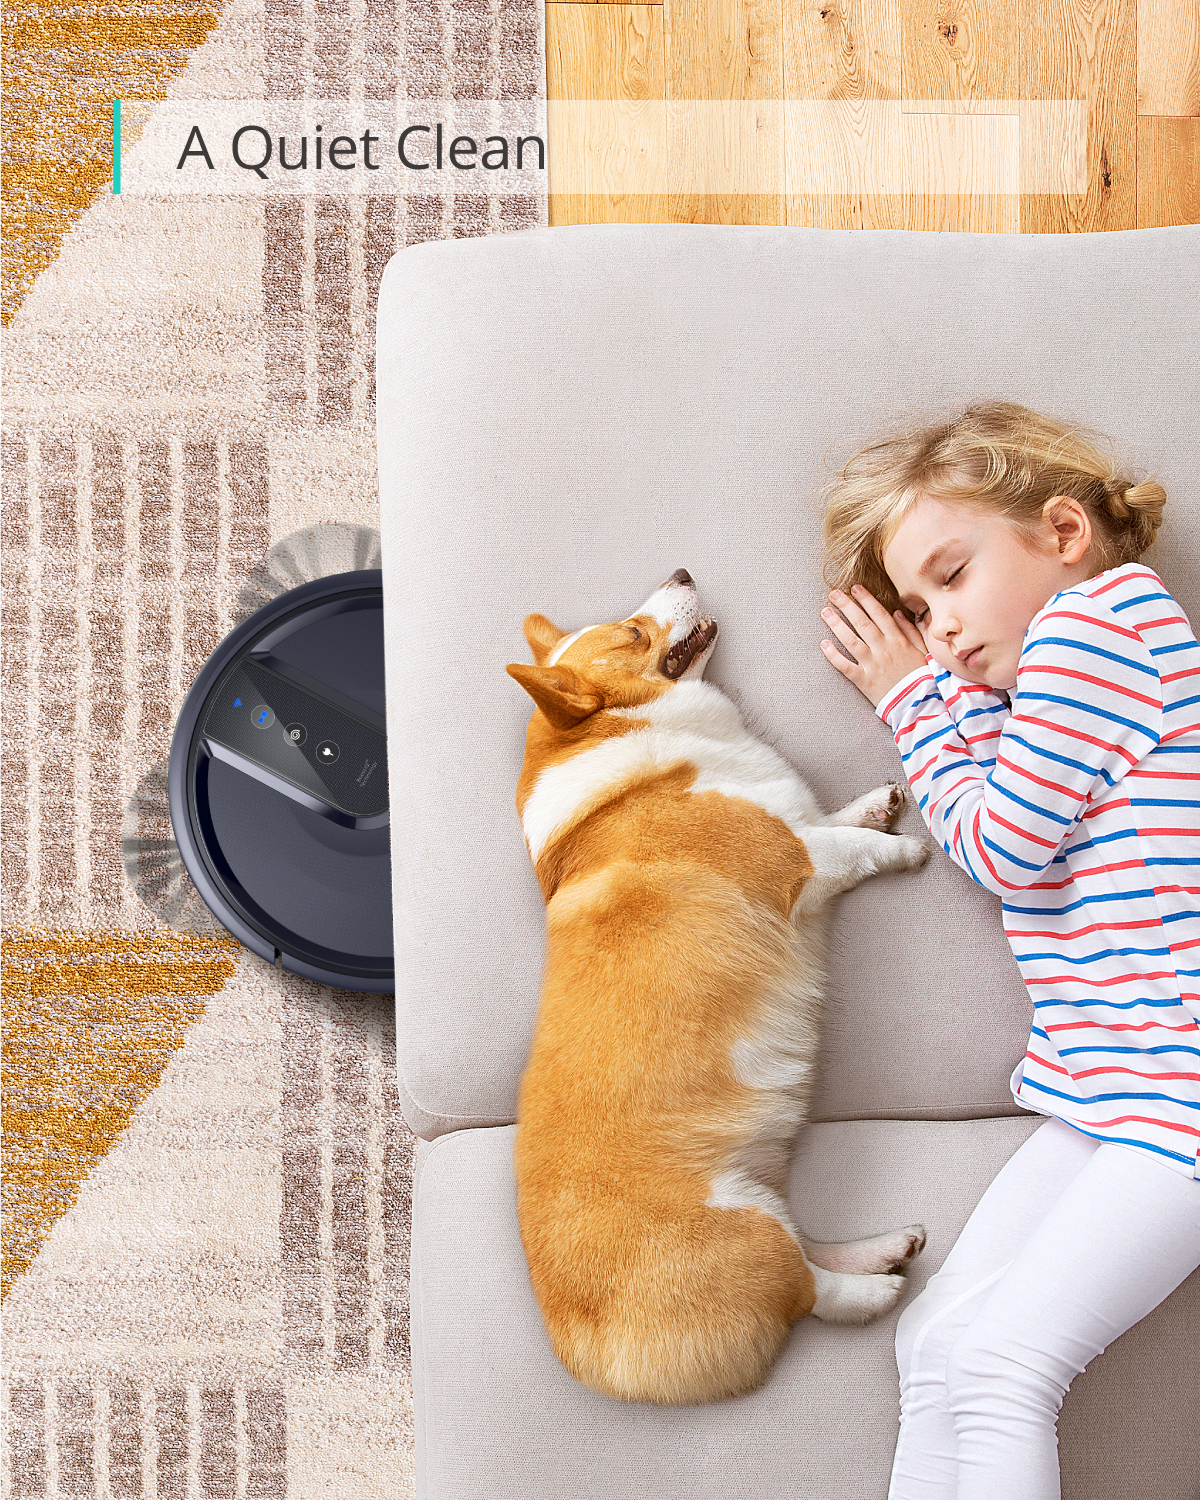 Anker eufy 25C Wi-Fi Connected Robot Vacuum, Great for Picking up Pet Hairs, Quiet, Slim - image 6 of 10